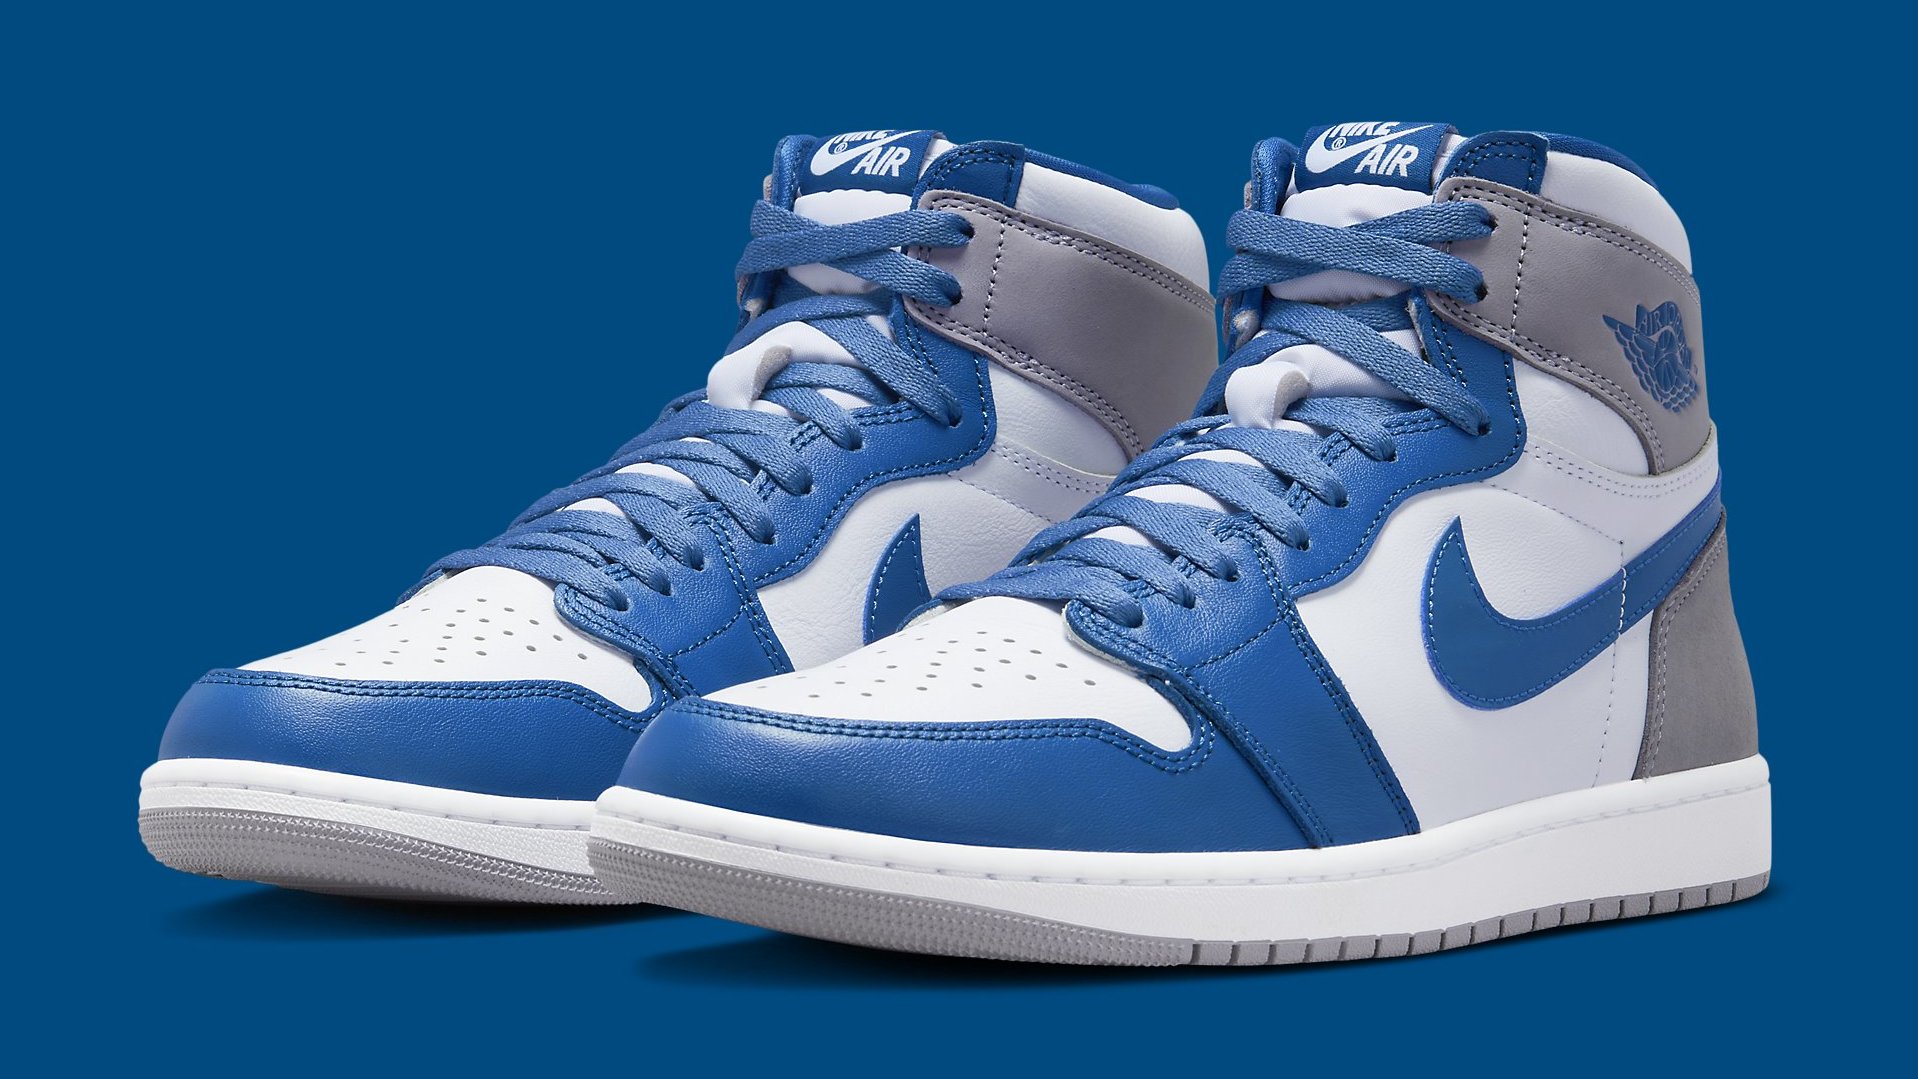 These Are The Top 10 Air Jordan 1 Highs - Sneaker News